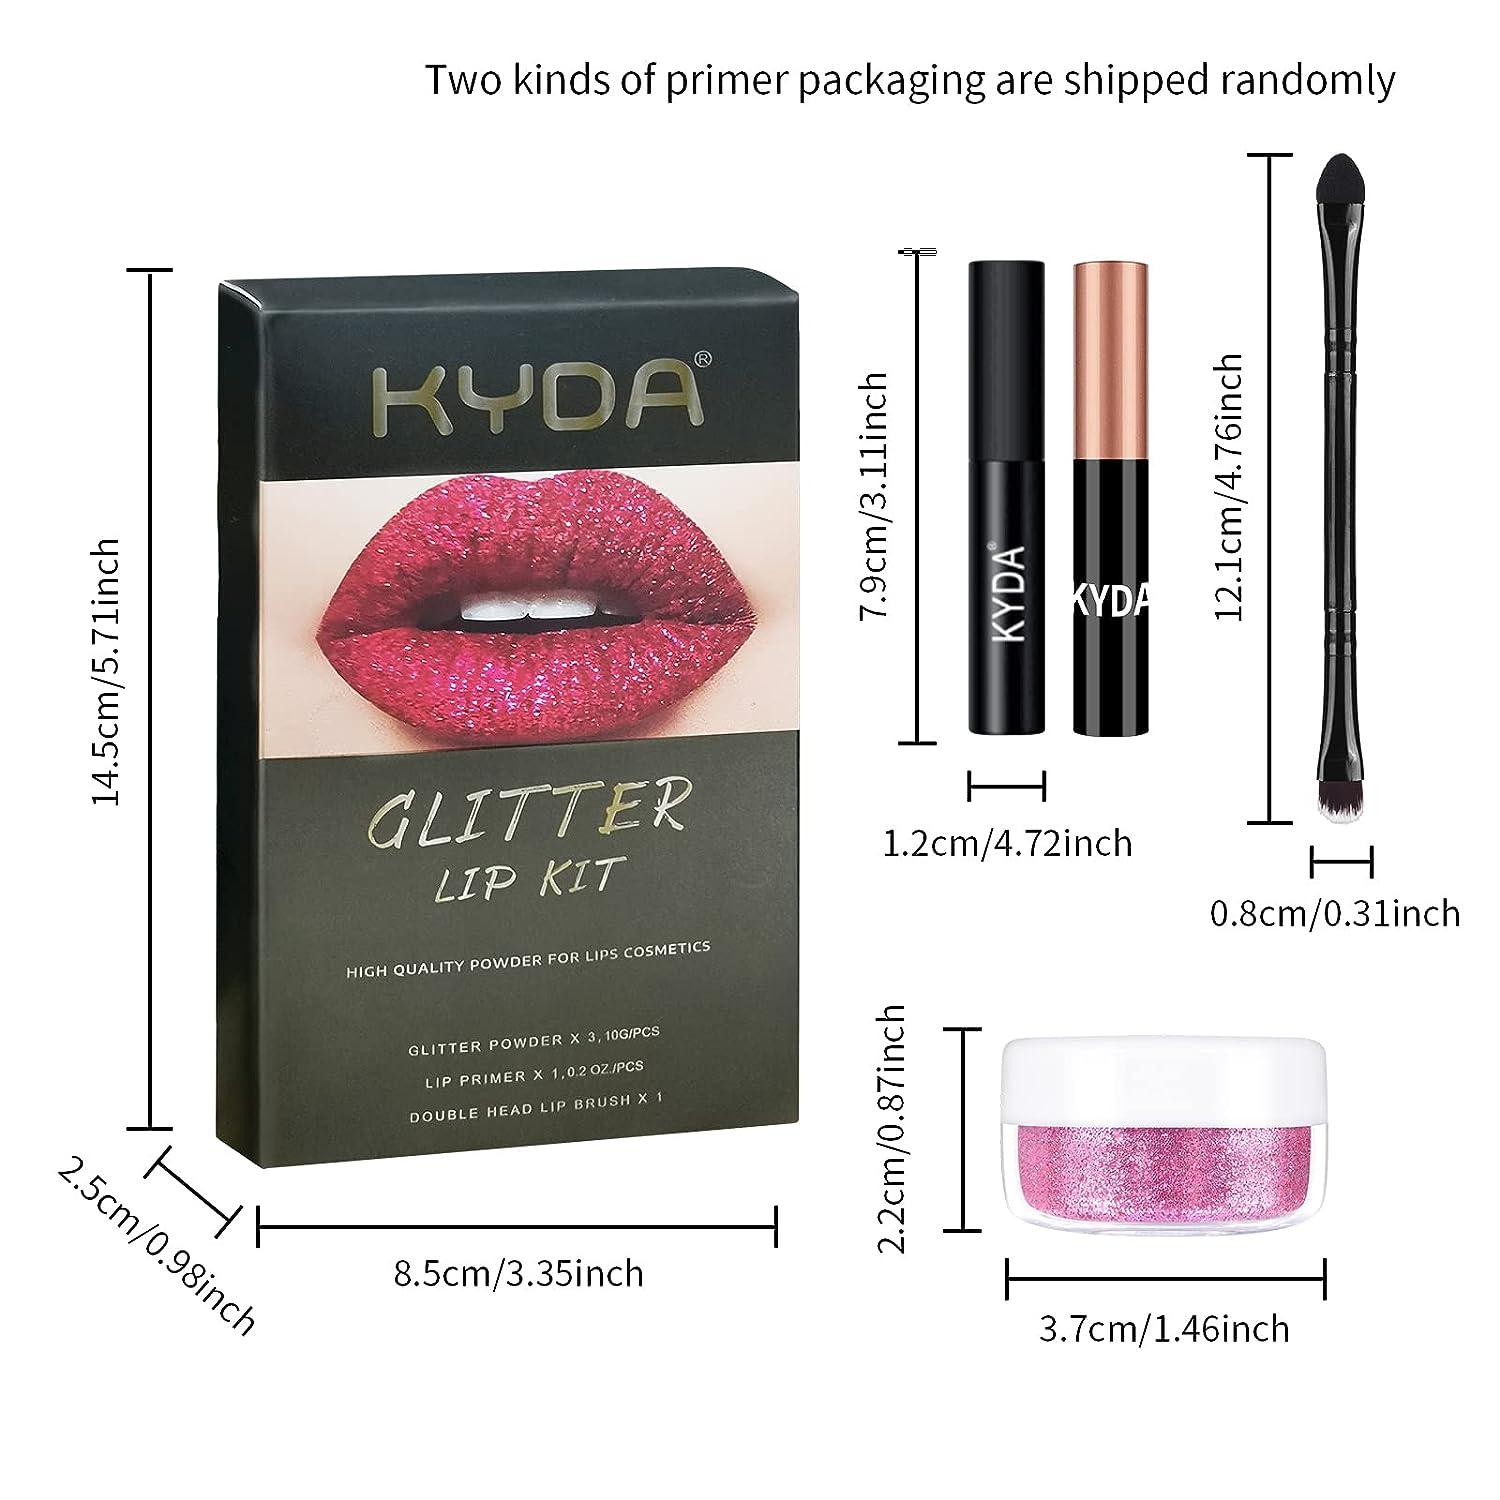 FREEORR 3 Colors Glitter Lip Kit Diamond and Glitter Metallic Lip Powder  with Lip Primer Waterproof Long Lasting & Smudge Proof Upgrade Version  Glitter Lip Cosmetic without Sticky Flake Off Set A